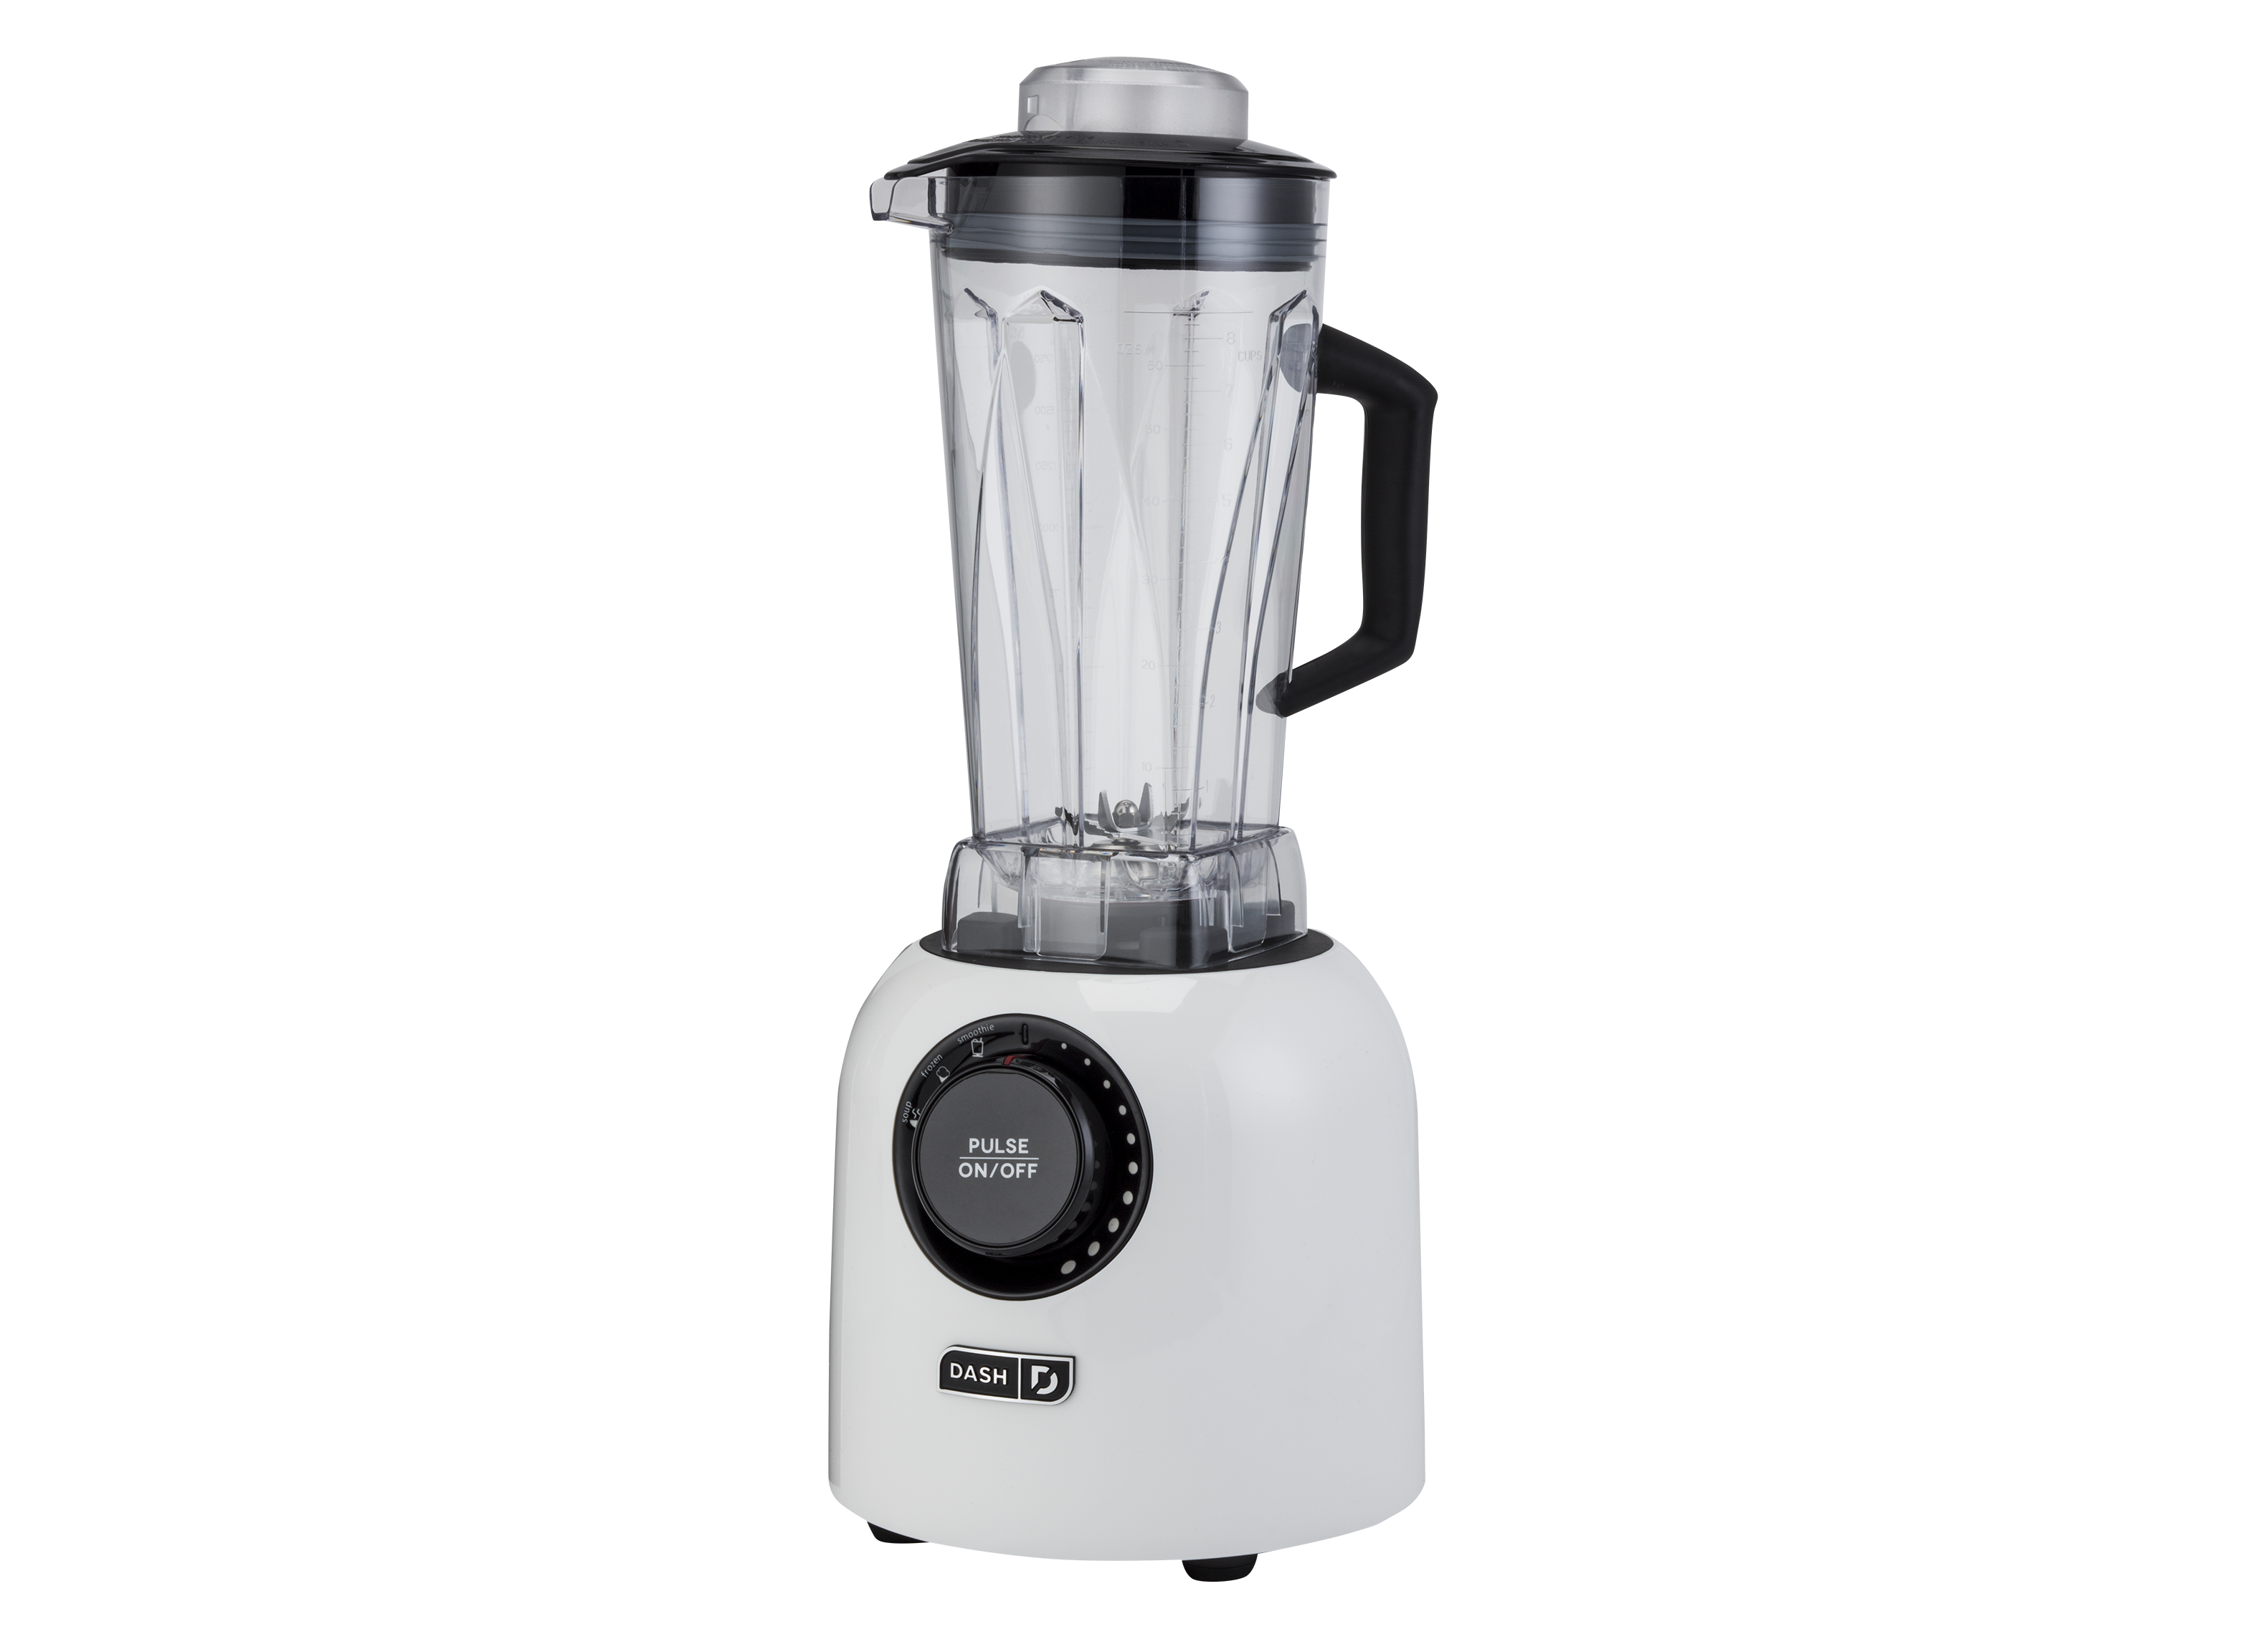 https://crdms.images.consumerreports.org/prod/products/cr/models/388195-blenders-dash-chefseriespowerblender.png